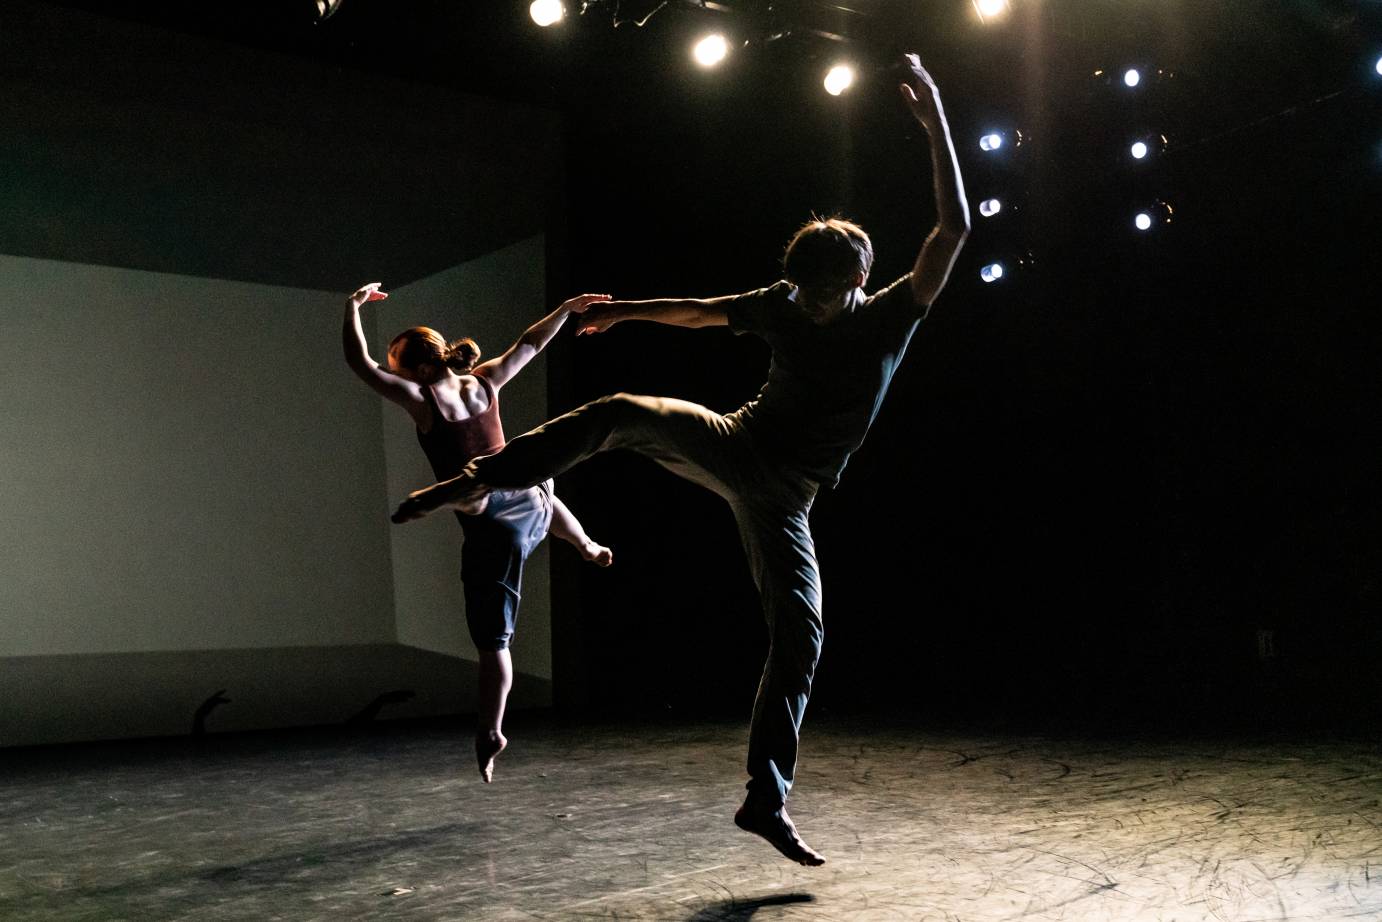 Two dancers back each other in dim light. Each has a leg lifted in a side attitude while one arms is curved overhead and the other is to the side.